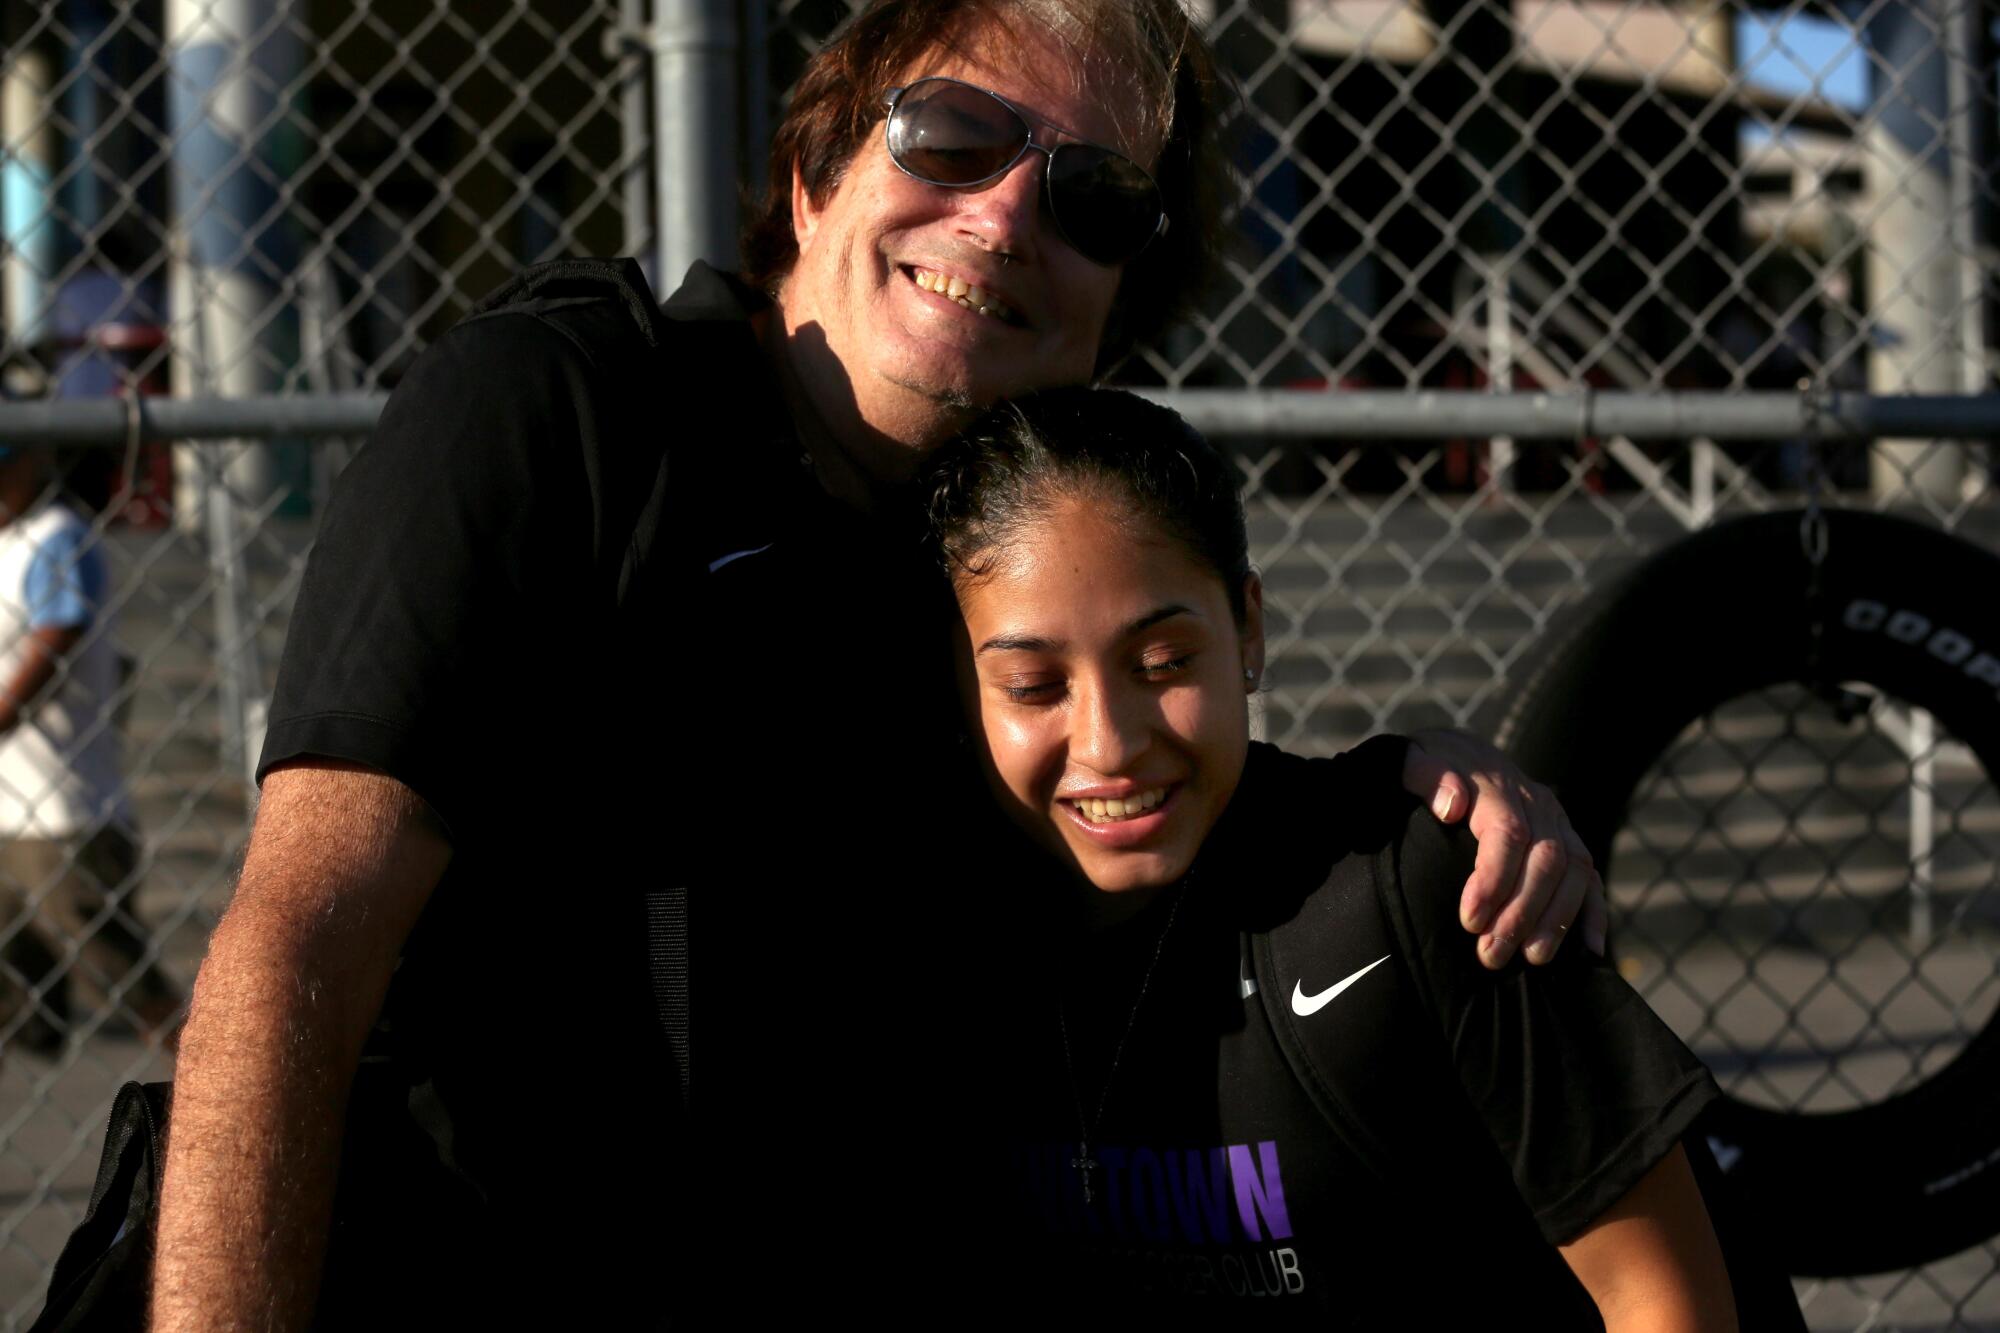 Nayelli Barahona receives a hug from her coach and mentor Mick Muhlfriedel 